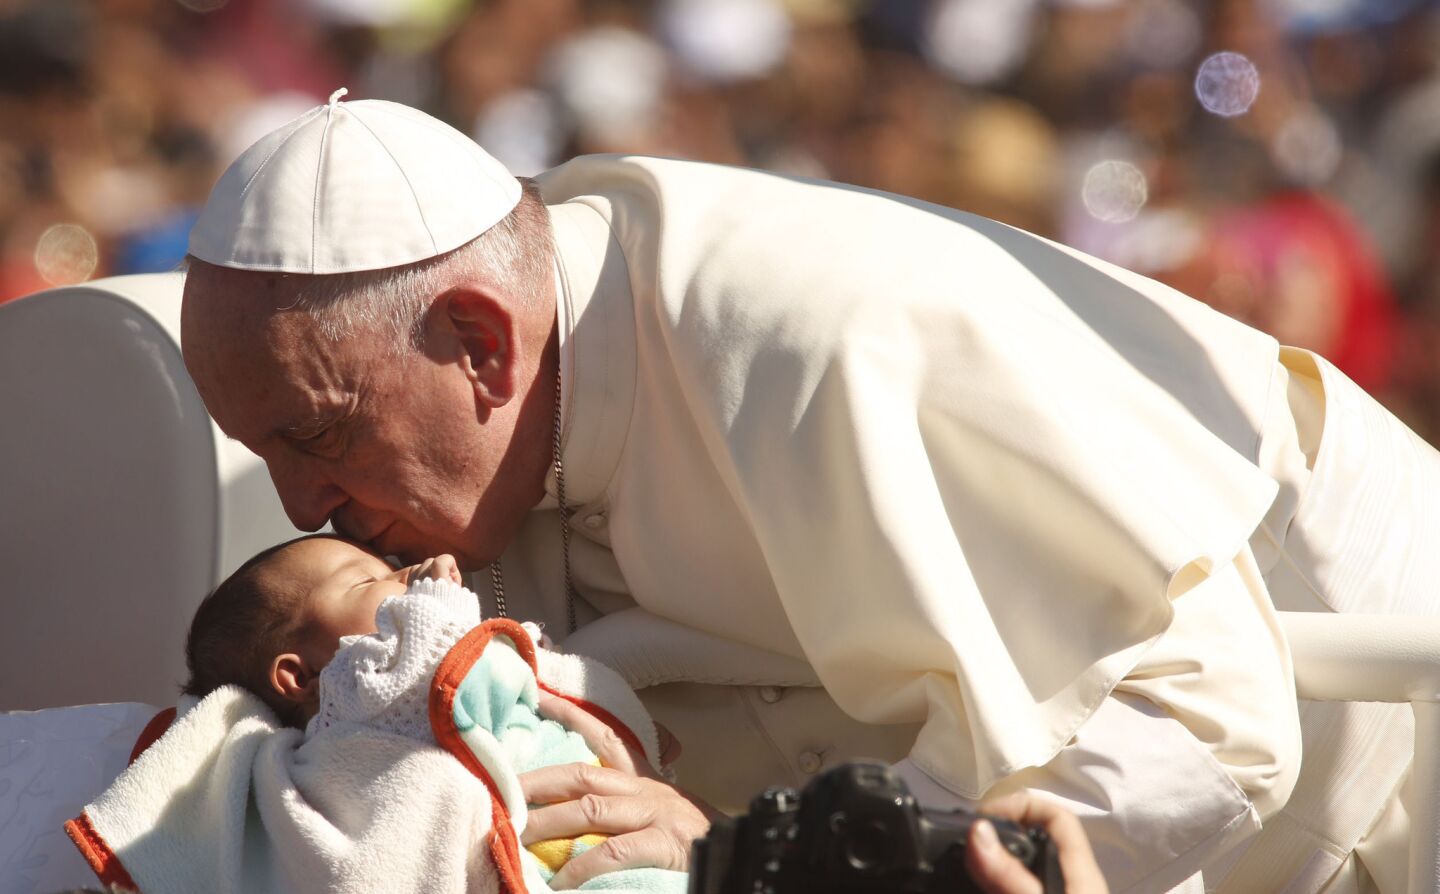 Pope Francis kisses a baby while riding through a crowd of pilgrims, many from indigenous communities surrounding San Cristobal de las Casas. The Mass included several Mayan languages.